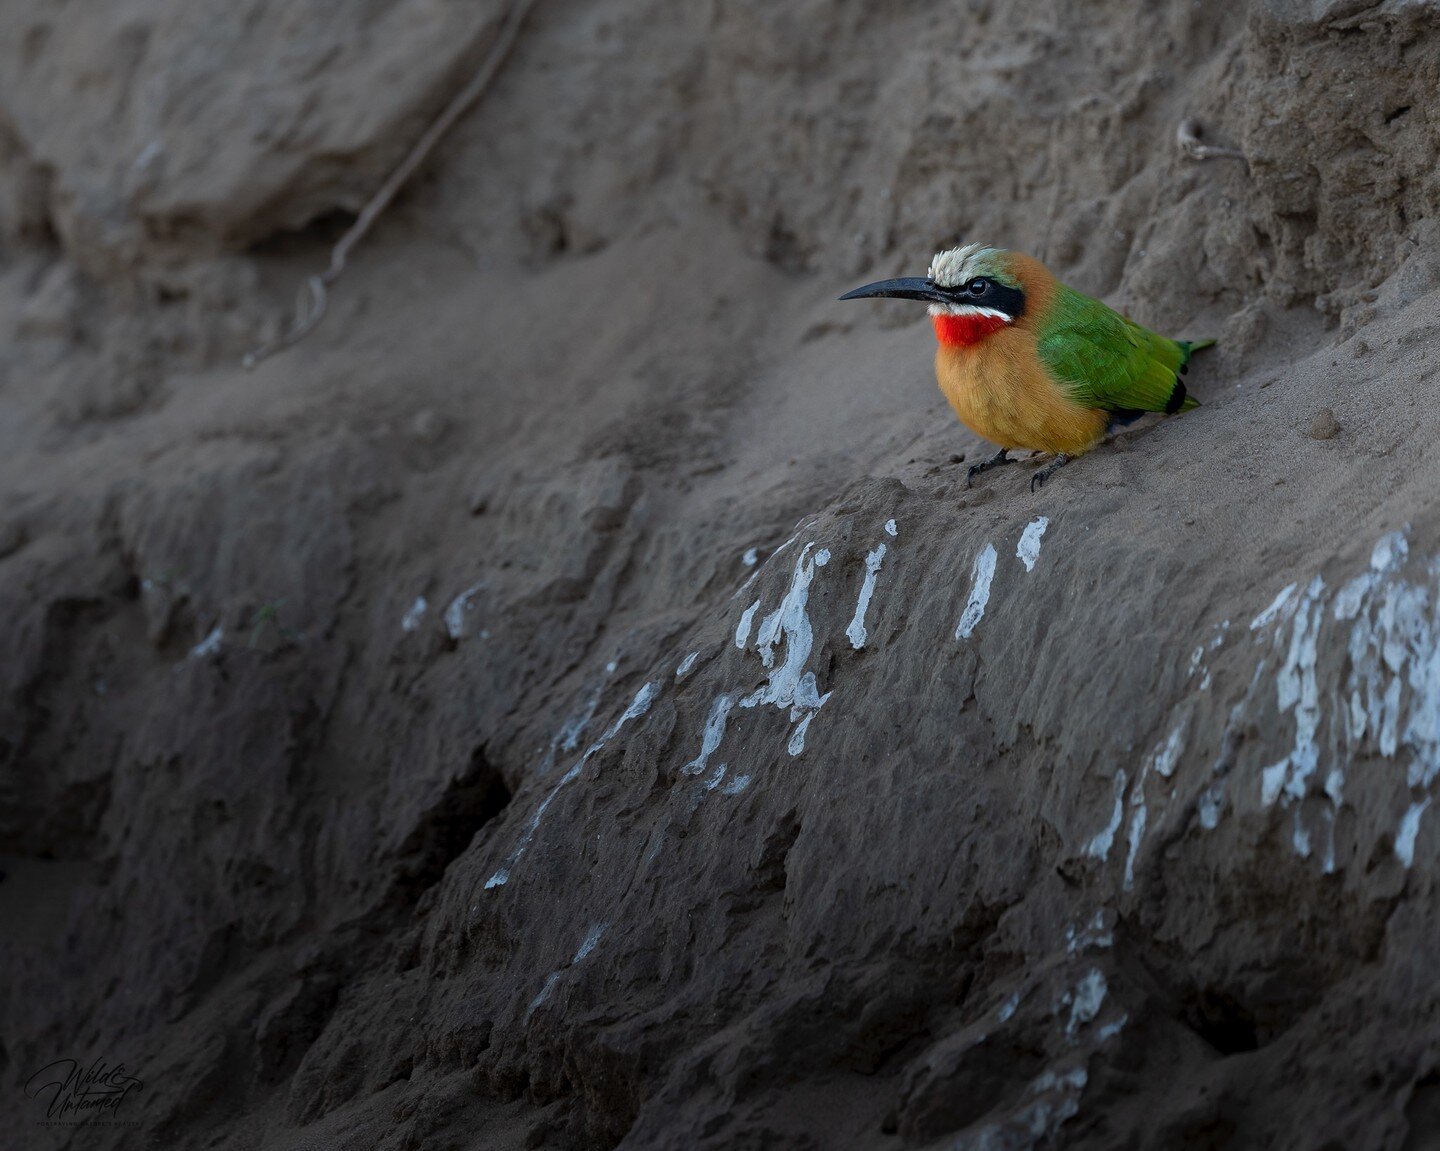 A pretty little white fronted bee-eater from the lower Zambezi in Zambia. These birds are almost everywhere there, inland as well as right at the banks of the Zambezi where they are nesting in the sand walls (Photo by @mabuphotography )

#birding #bi